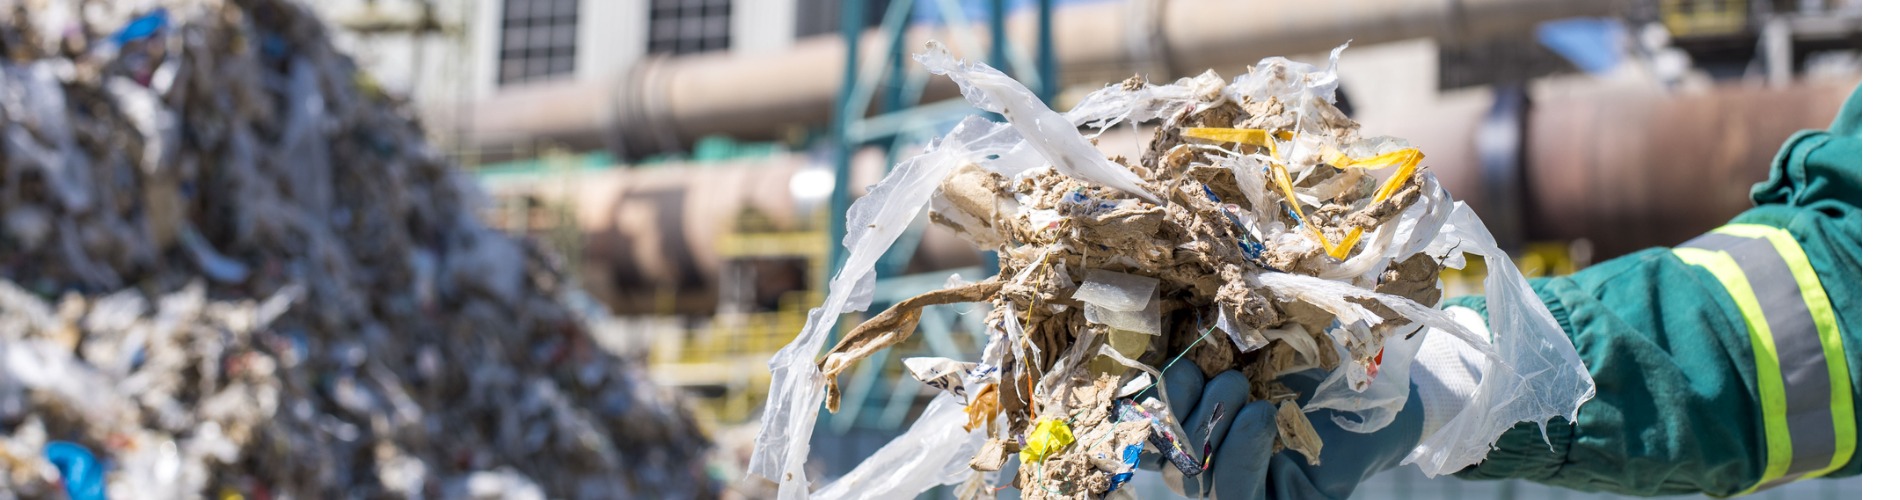 selective-focus-shot-of-a-person-wearing-gloves-holding-shredded-municipal-waste 1900x500